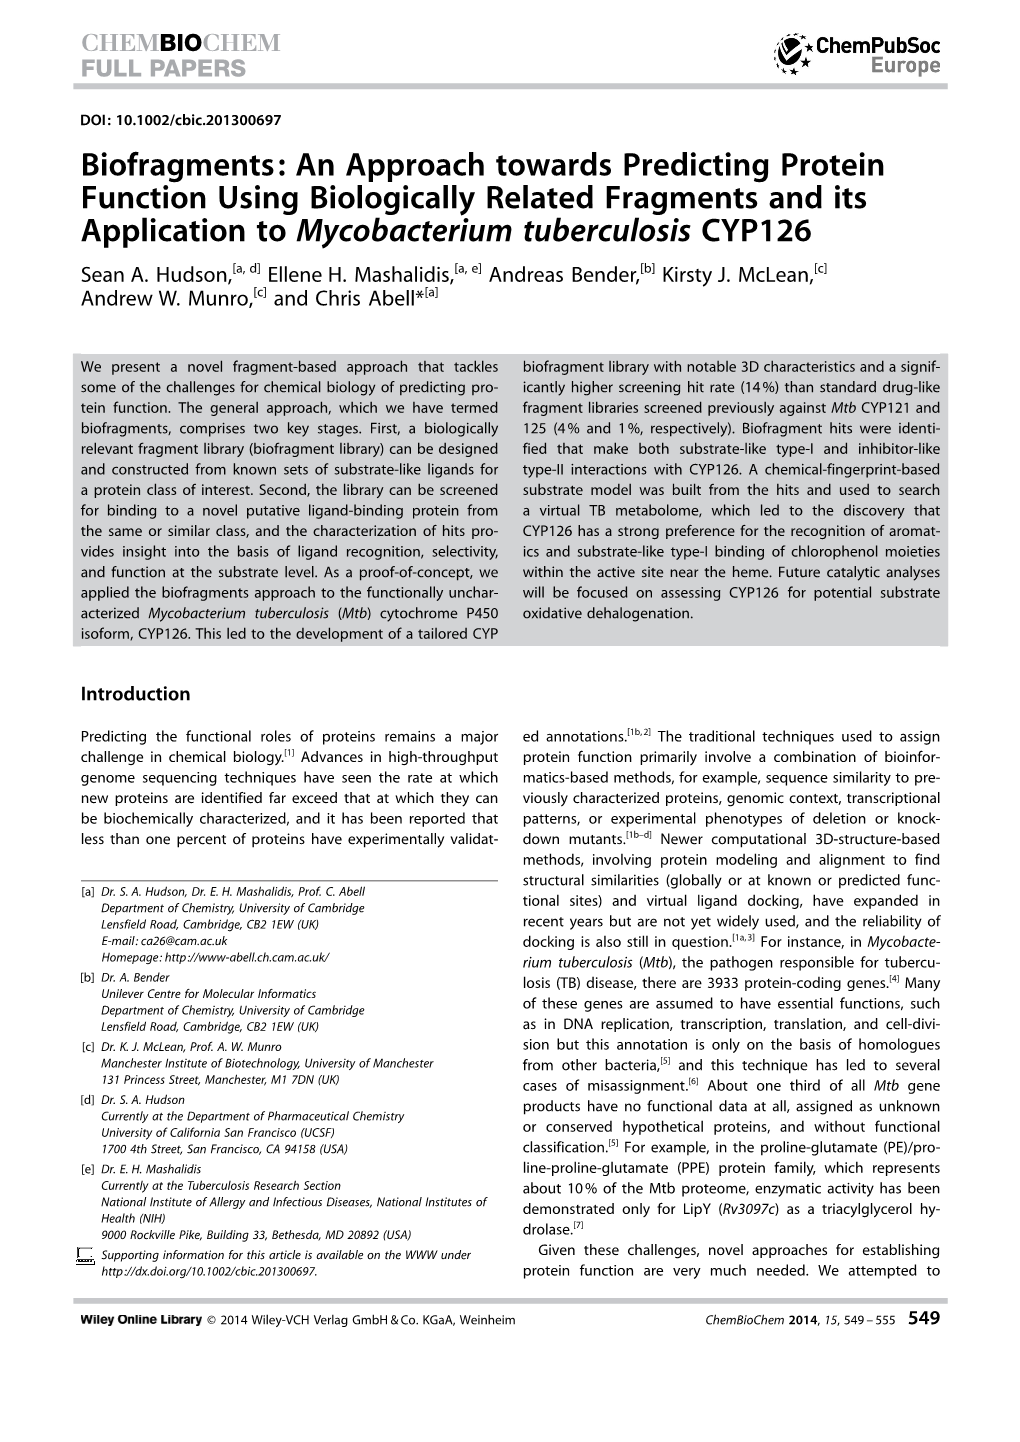 Biofragments: an Approach Towards Predicting Protein Function Using Biologically Related Fragments and Its Application to Mycobacterium Tuberculosis CYP126 Sean A